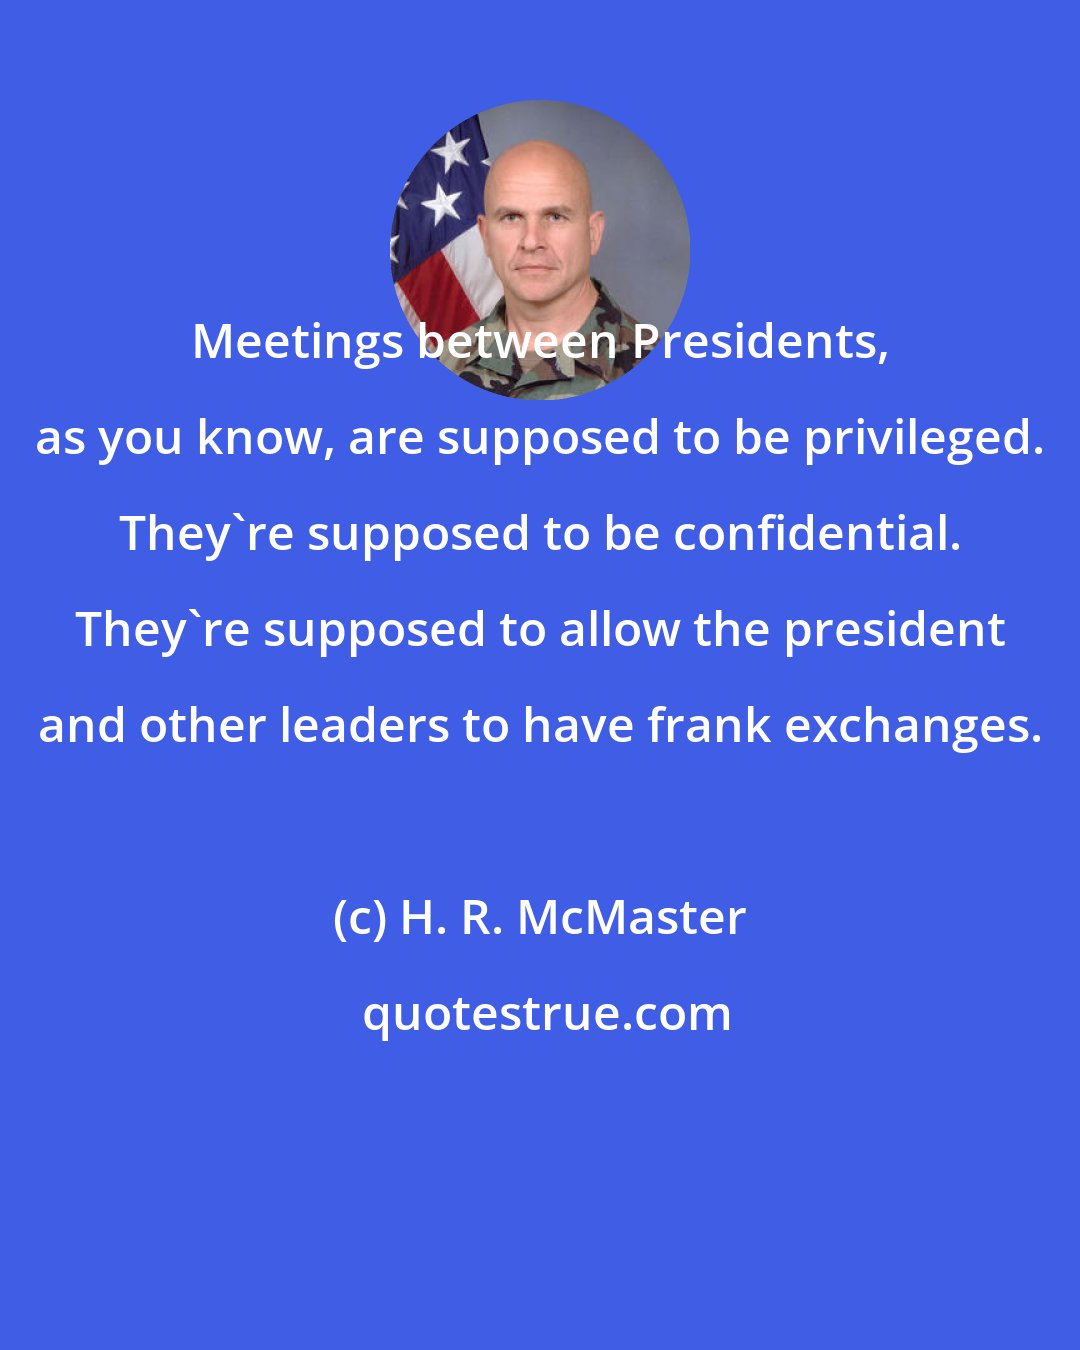 H. R. McMaster: Meetings between Presidents, as you know, are supposed to be privileged. They're supposed to be confidential. They're supposed to allow the president and other leaders to have frank exchanges.